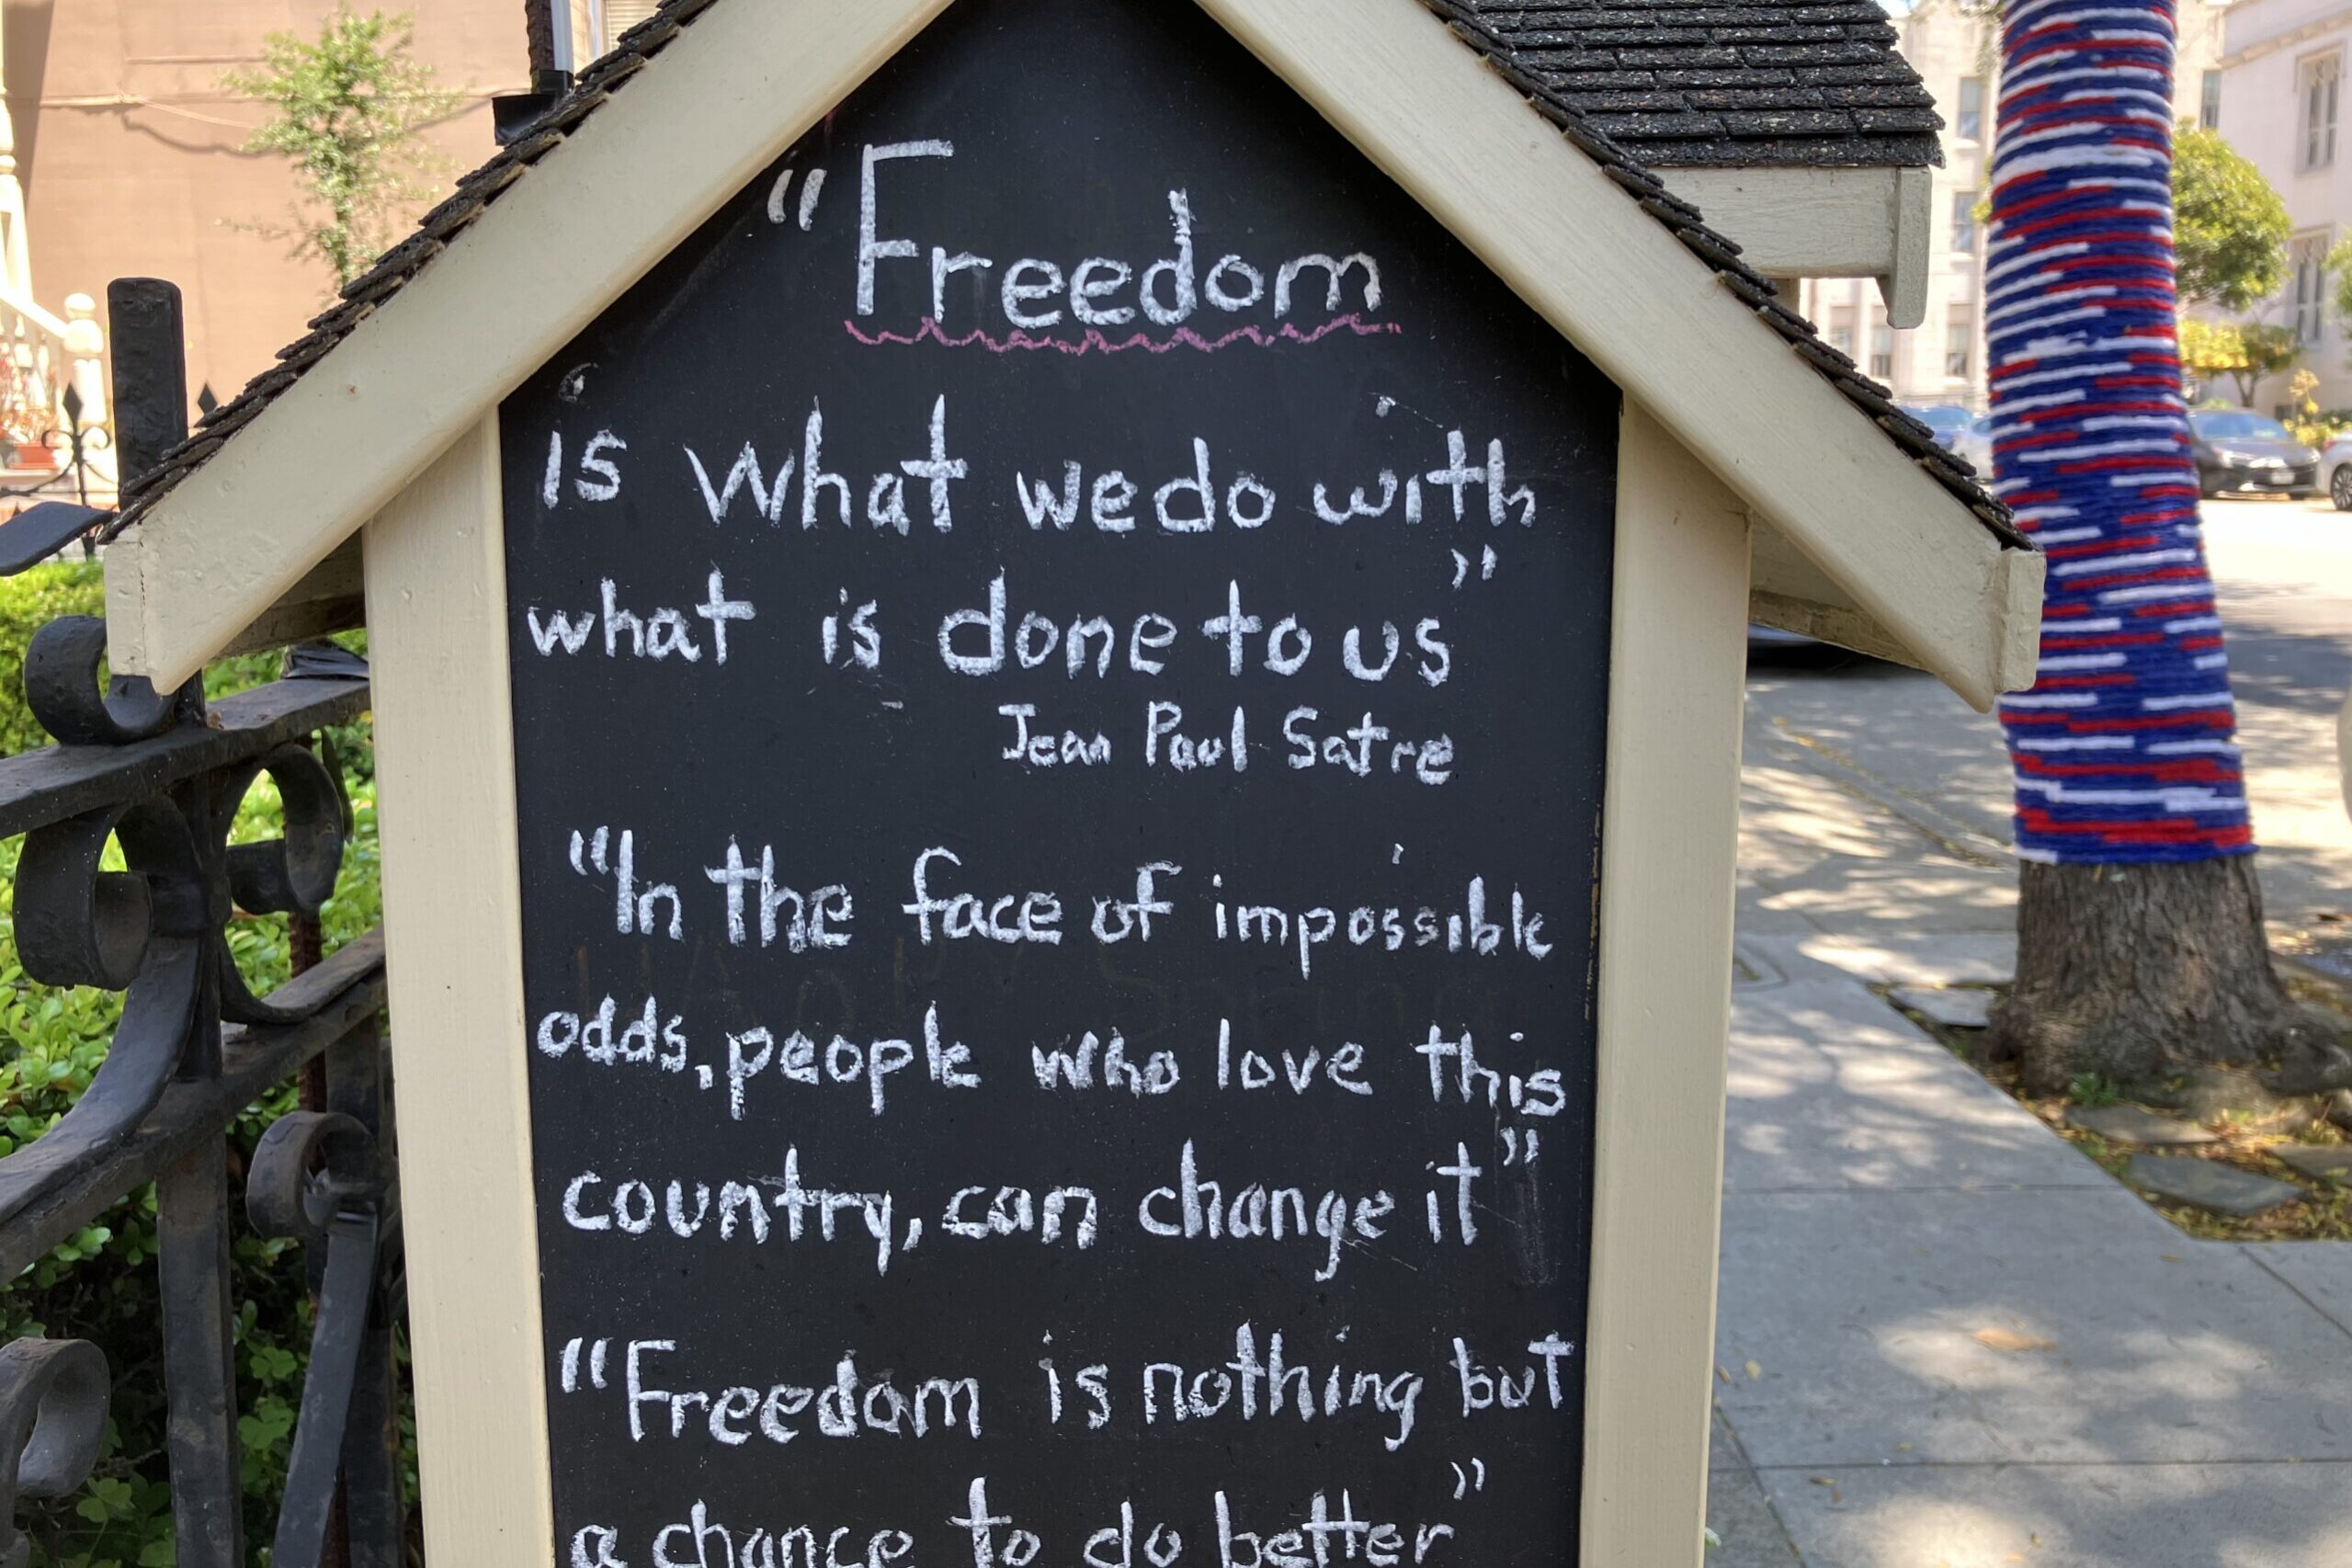 Sign pointing to freedom